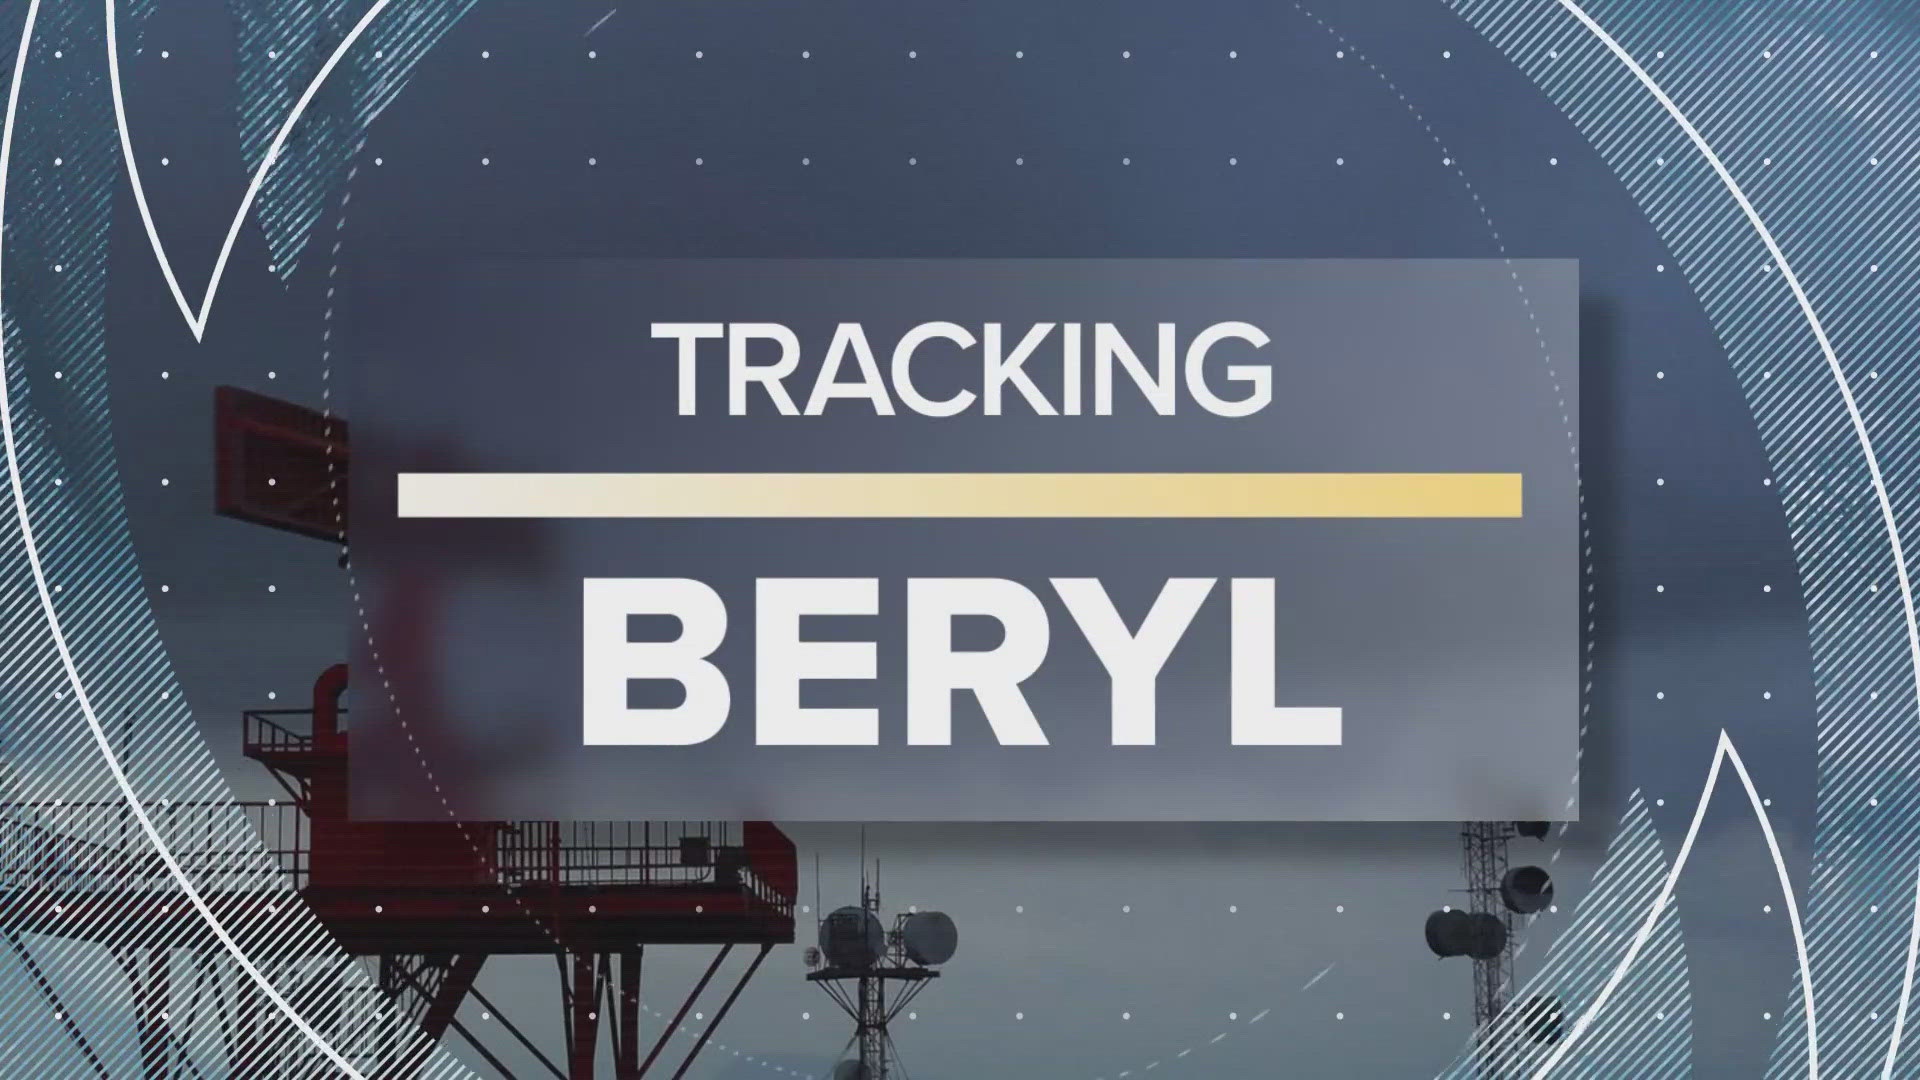 After hitting Mexico on Friday, Beryl could intensify and hit certain parts of the Lone Star state. Here is the latest.